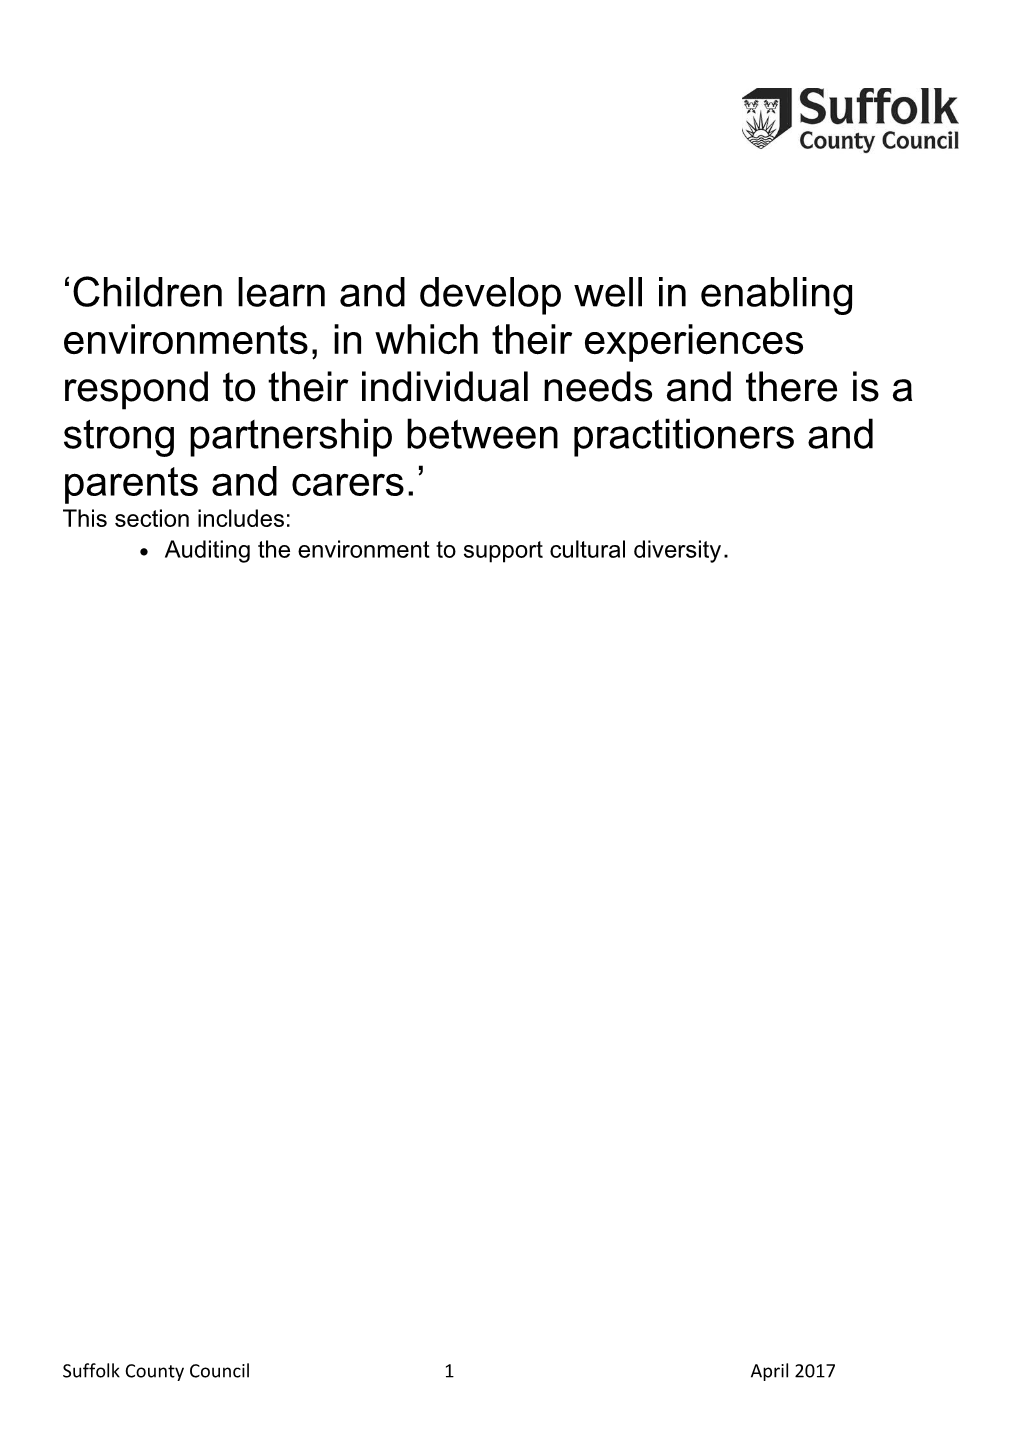 Children Learn and Develop Well in Enabling Environments, in Which Their Experiences Respond